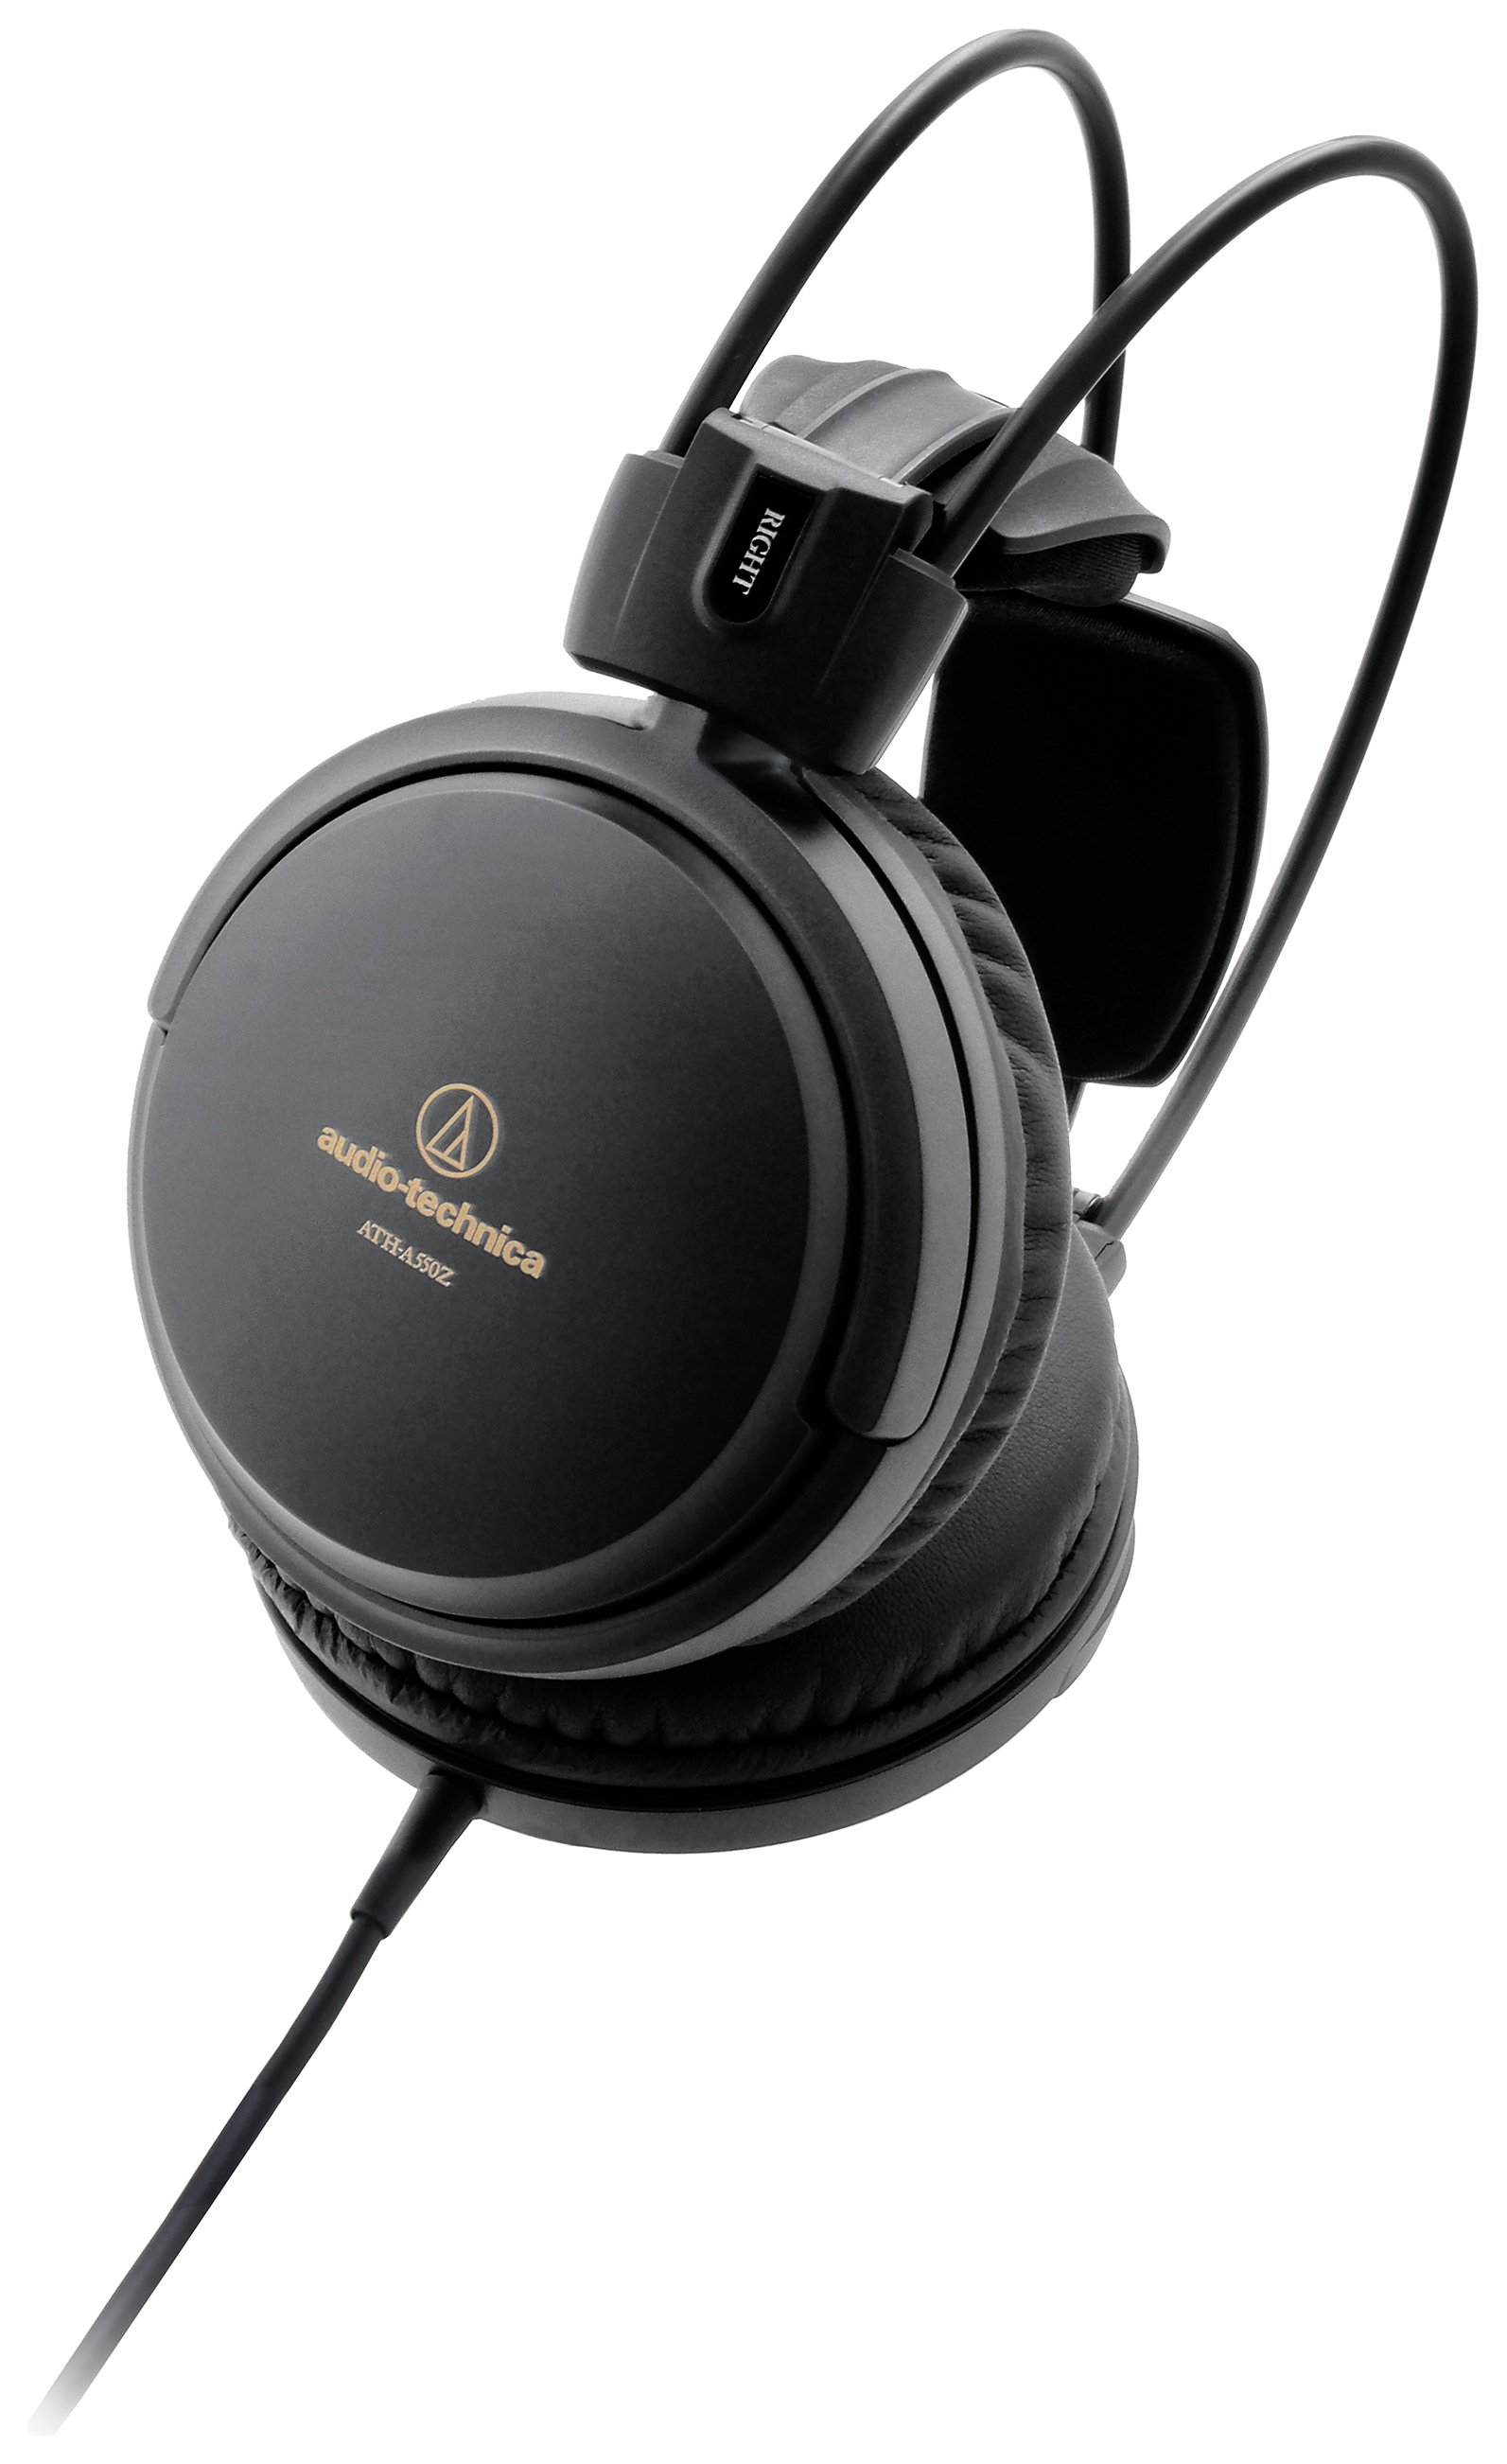 Audio Technica ATH-A550Z On-Ear Headphones Review